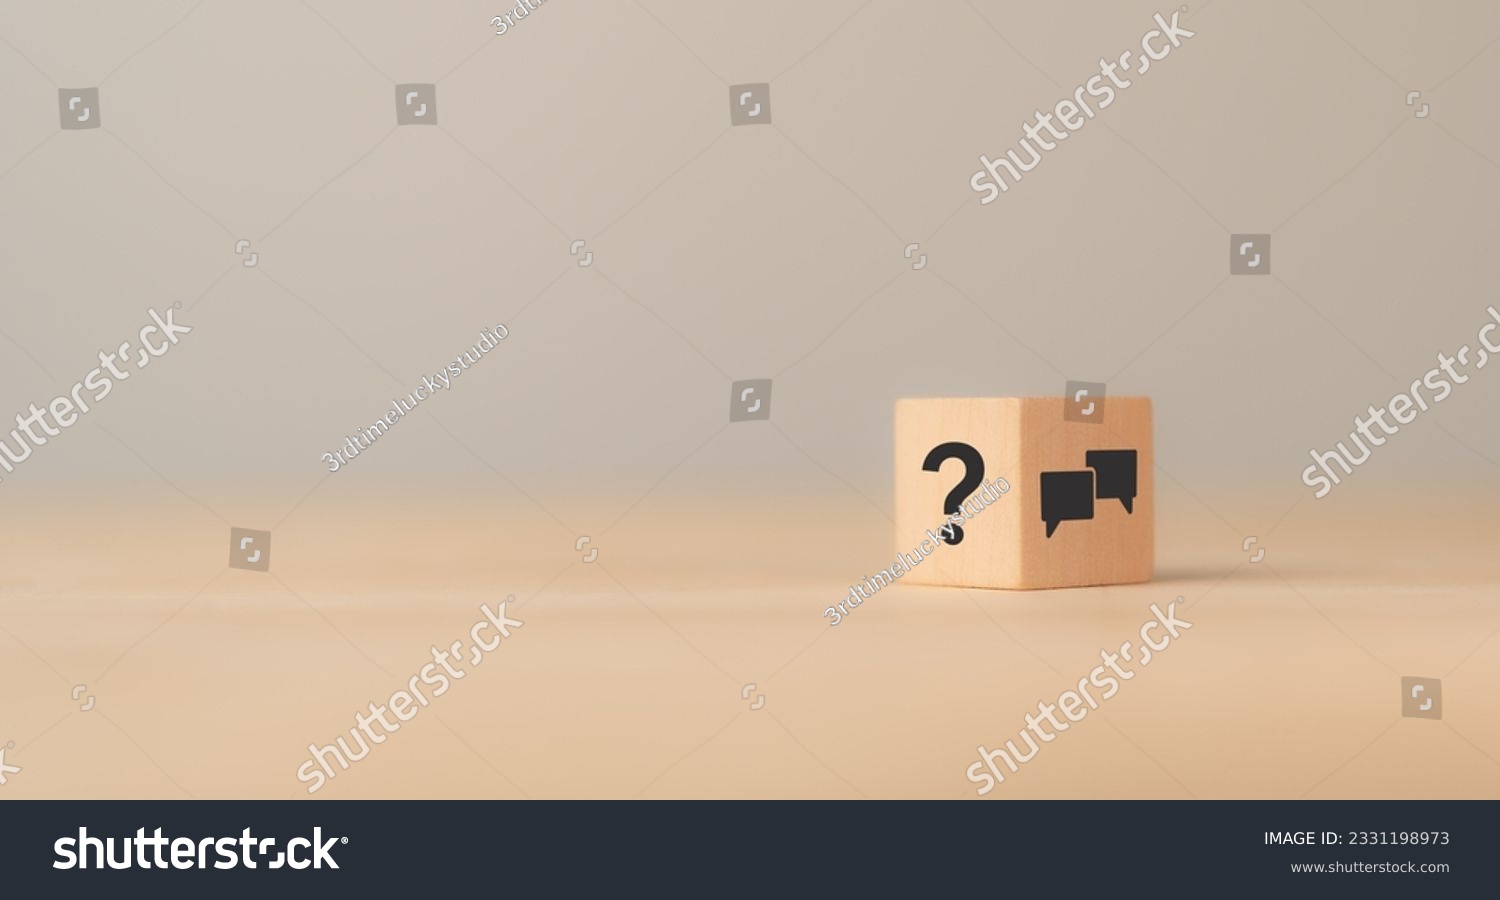 Q and A concept. Q and A symbols on wooden cube block on a grey background. Illustration for frequently asked questions concepts in websites, social networks, business issues. Recommendation concept. #2331198973